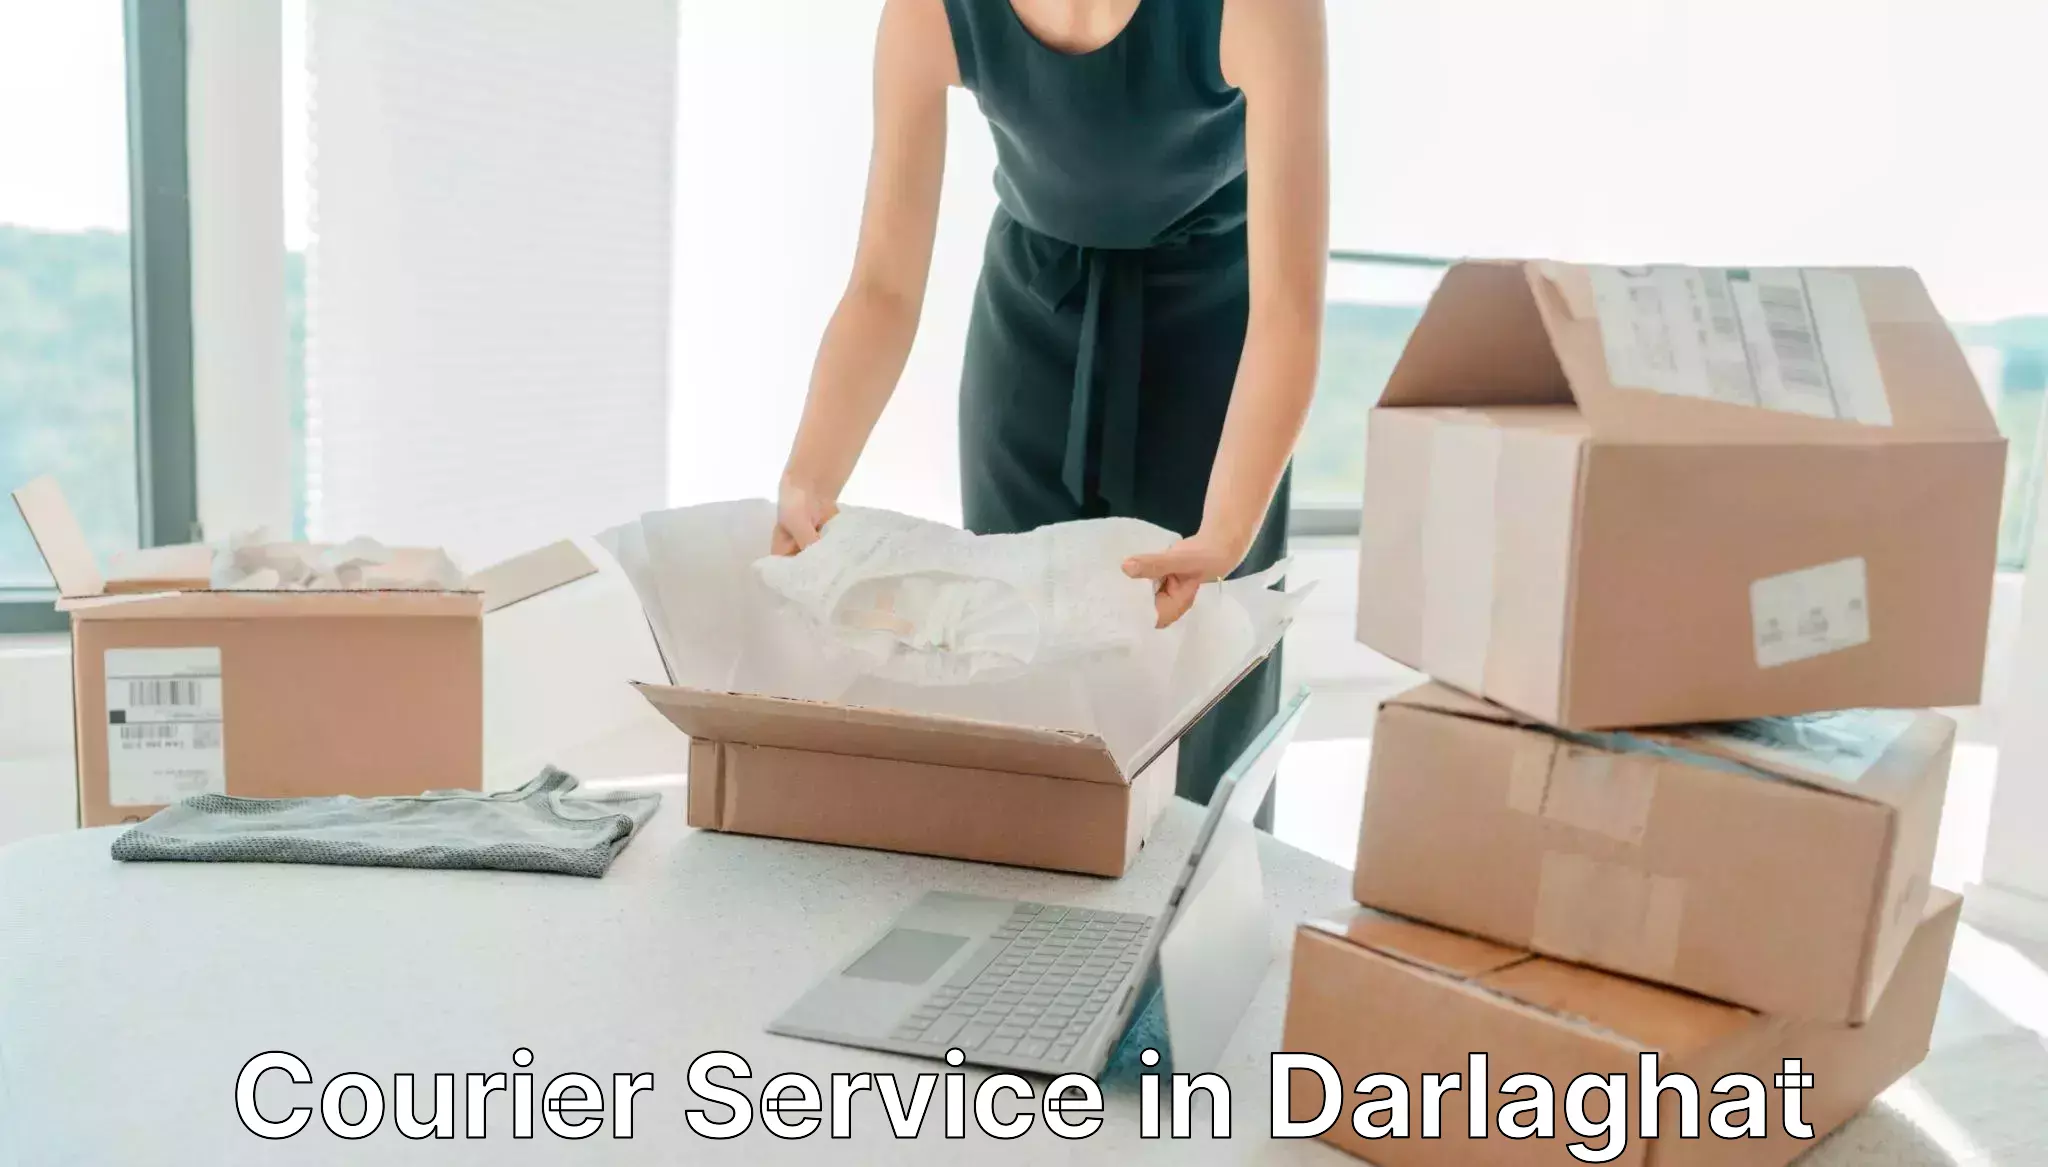 Personal parcel delivery in Darlaghat